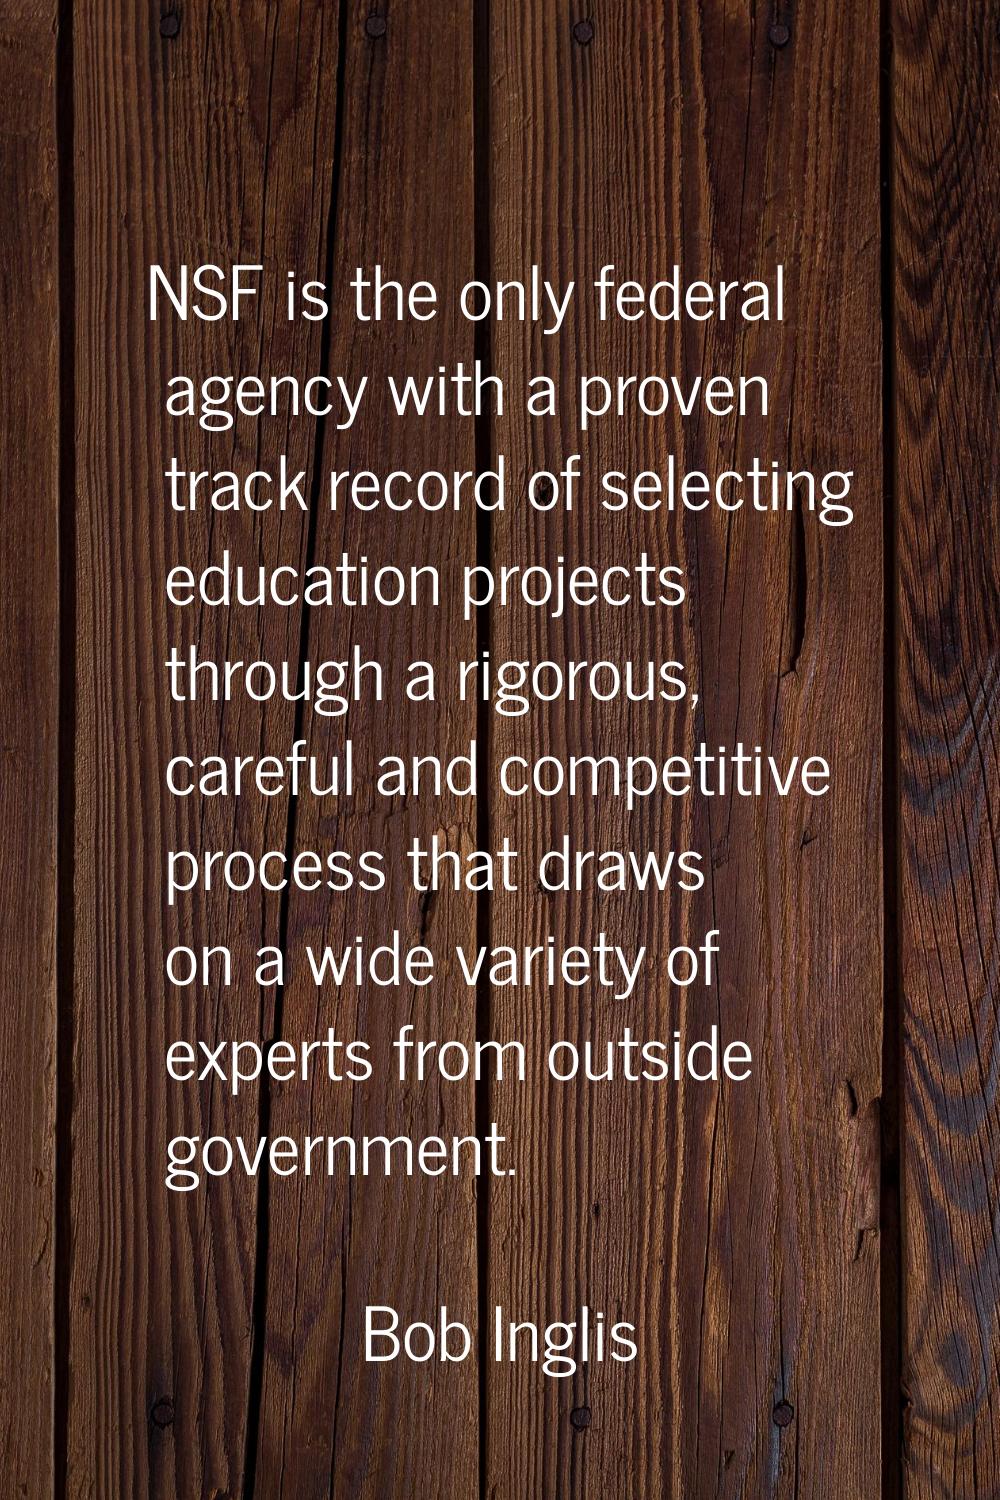 NSF is the only federal agency with a proven track record of selecting education projects through a